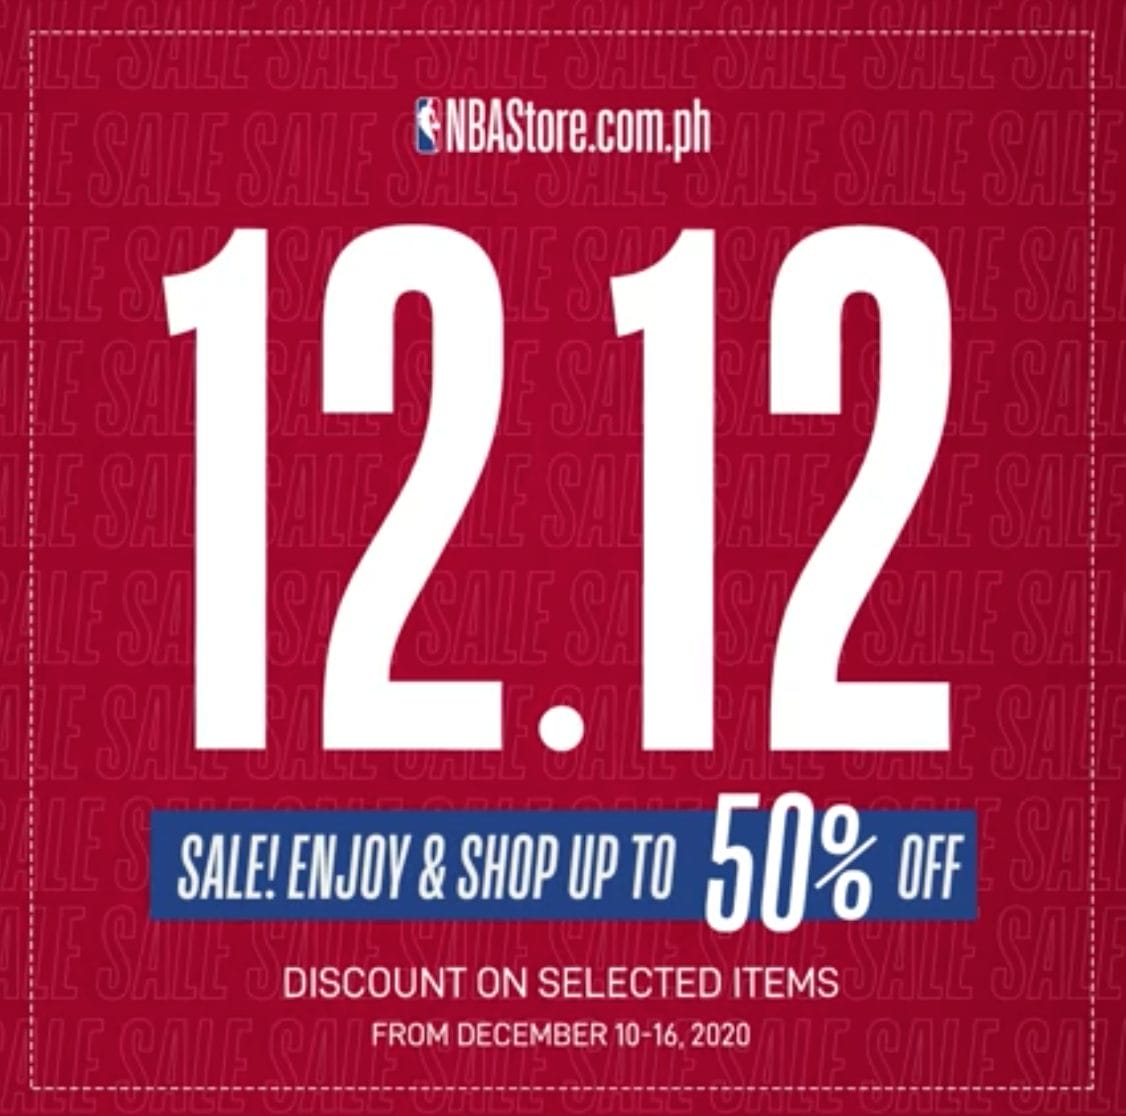 NBA Store Philippines - 12.12 Deal: Up to 50% Off on Selected